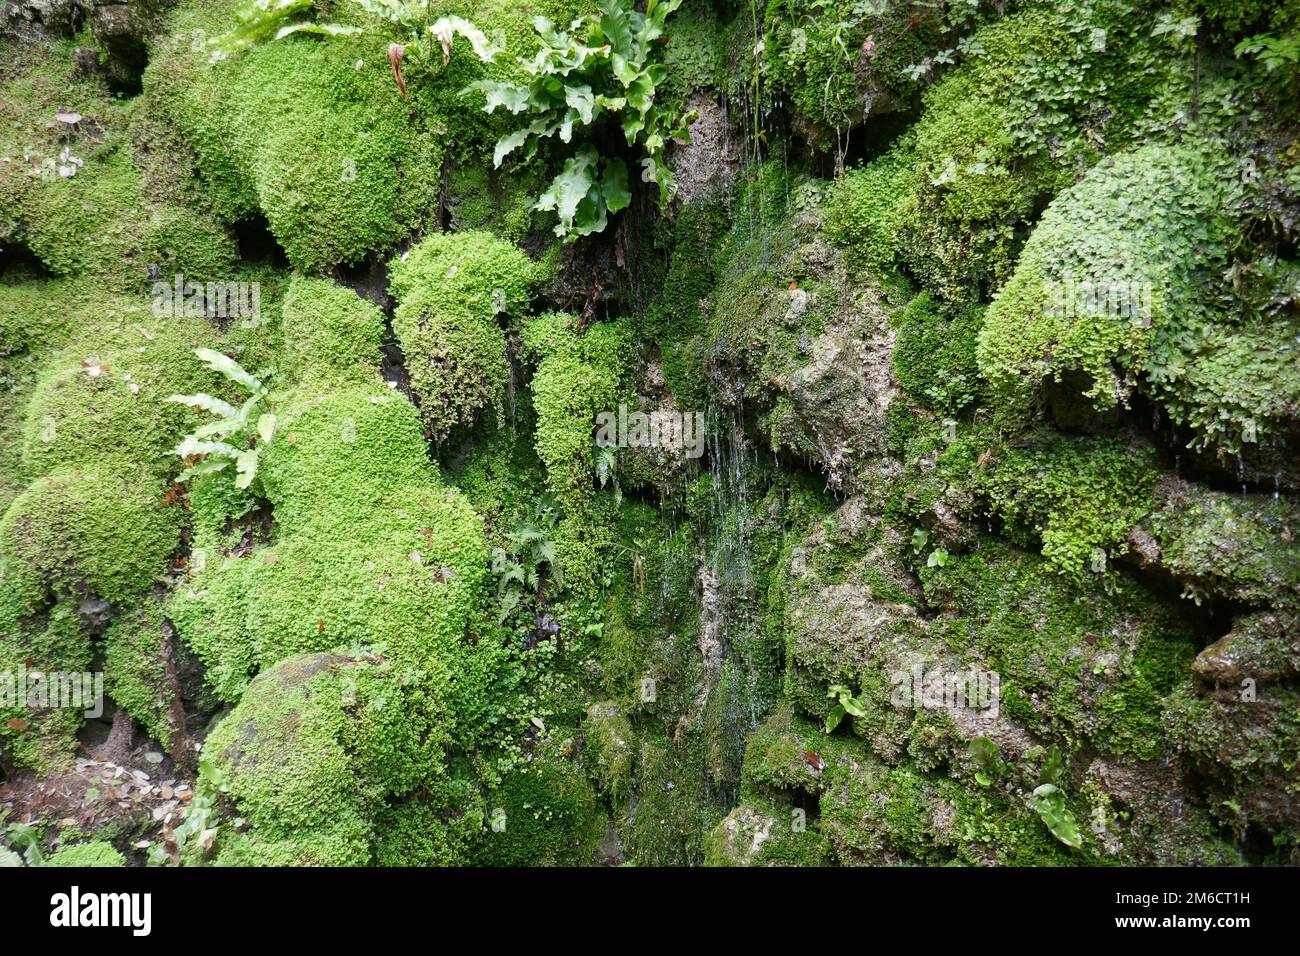 Small waterfall flowing down over ancient plant bryophytes liverworts and mosses Stock Photo